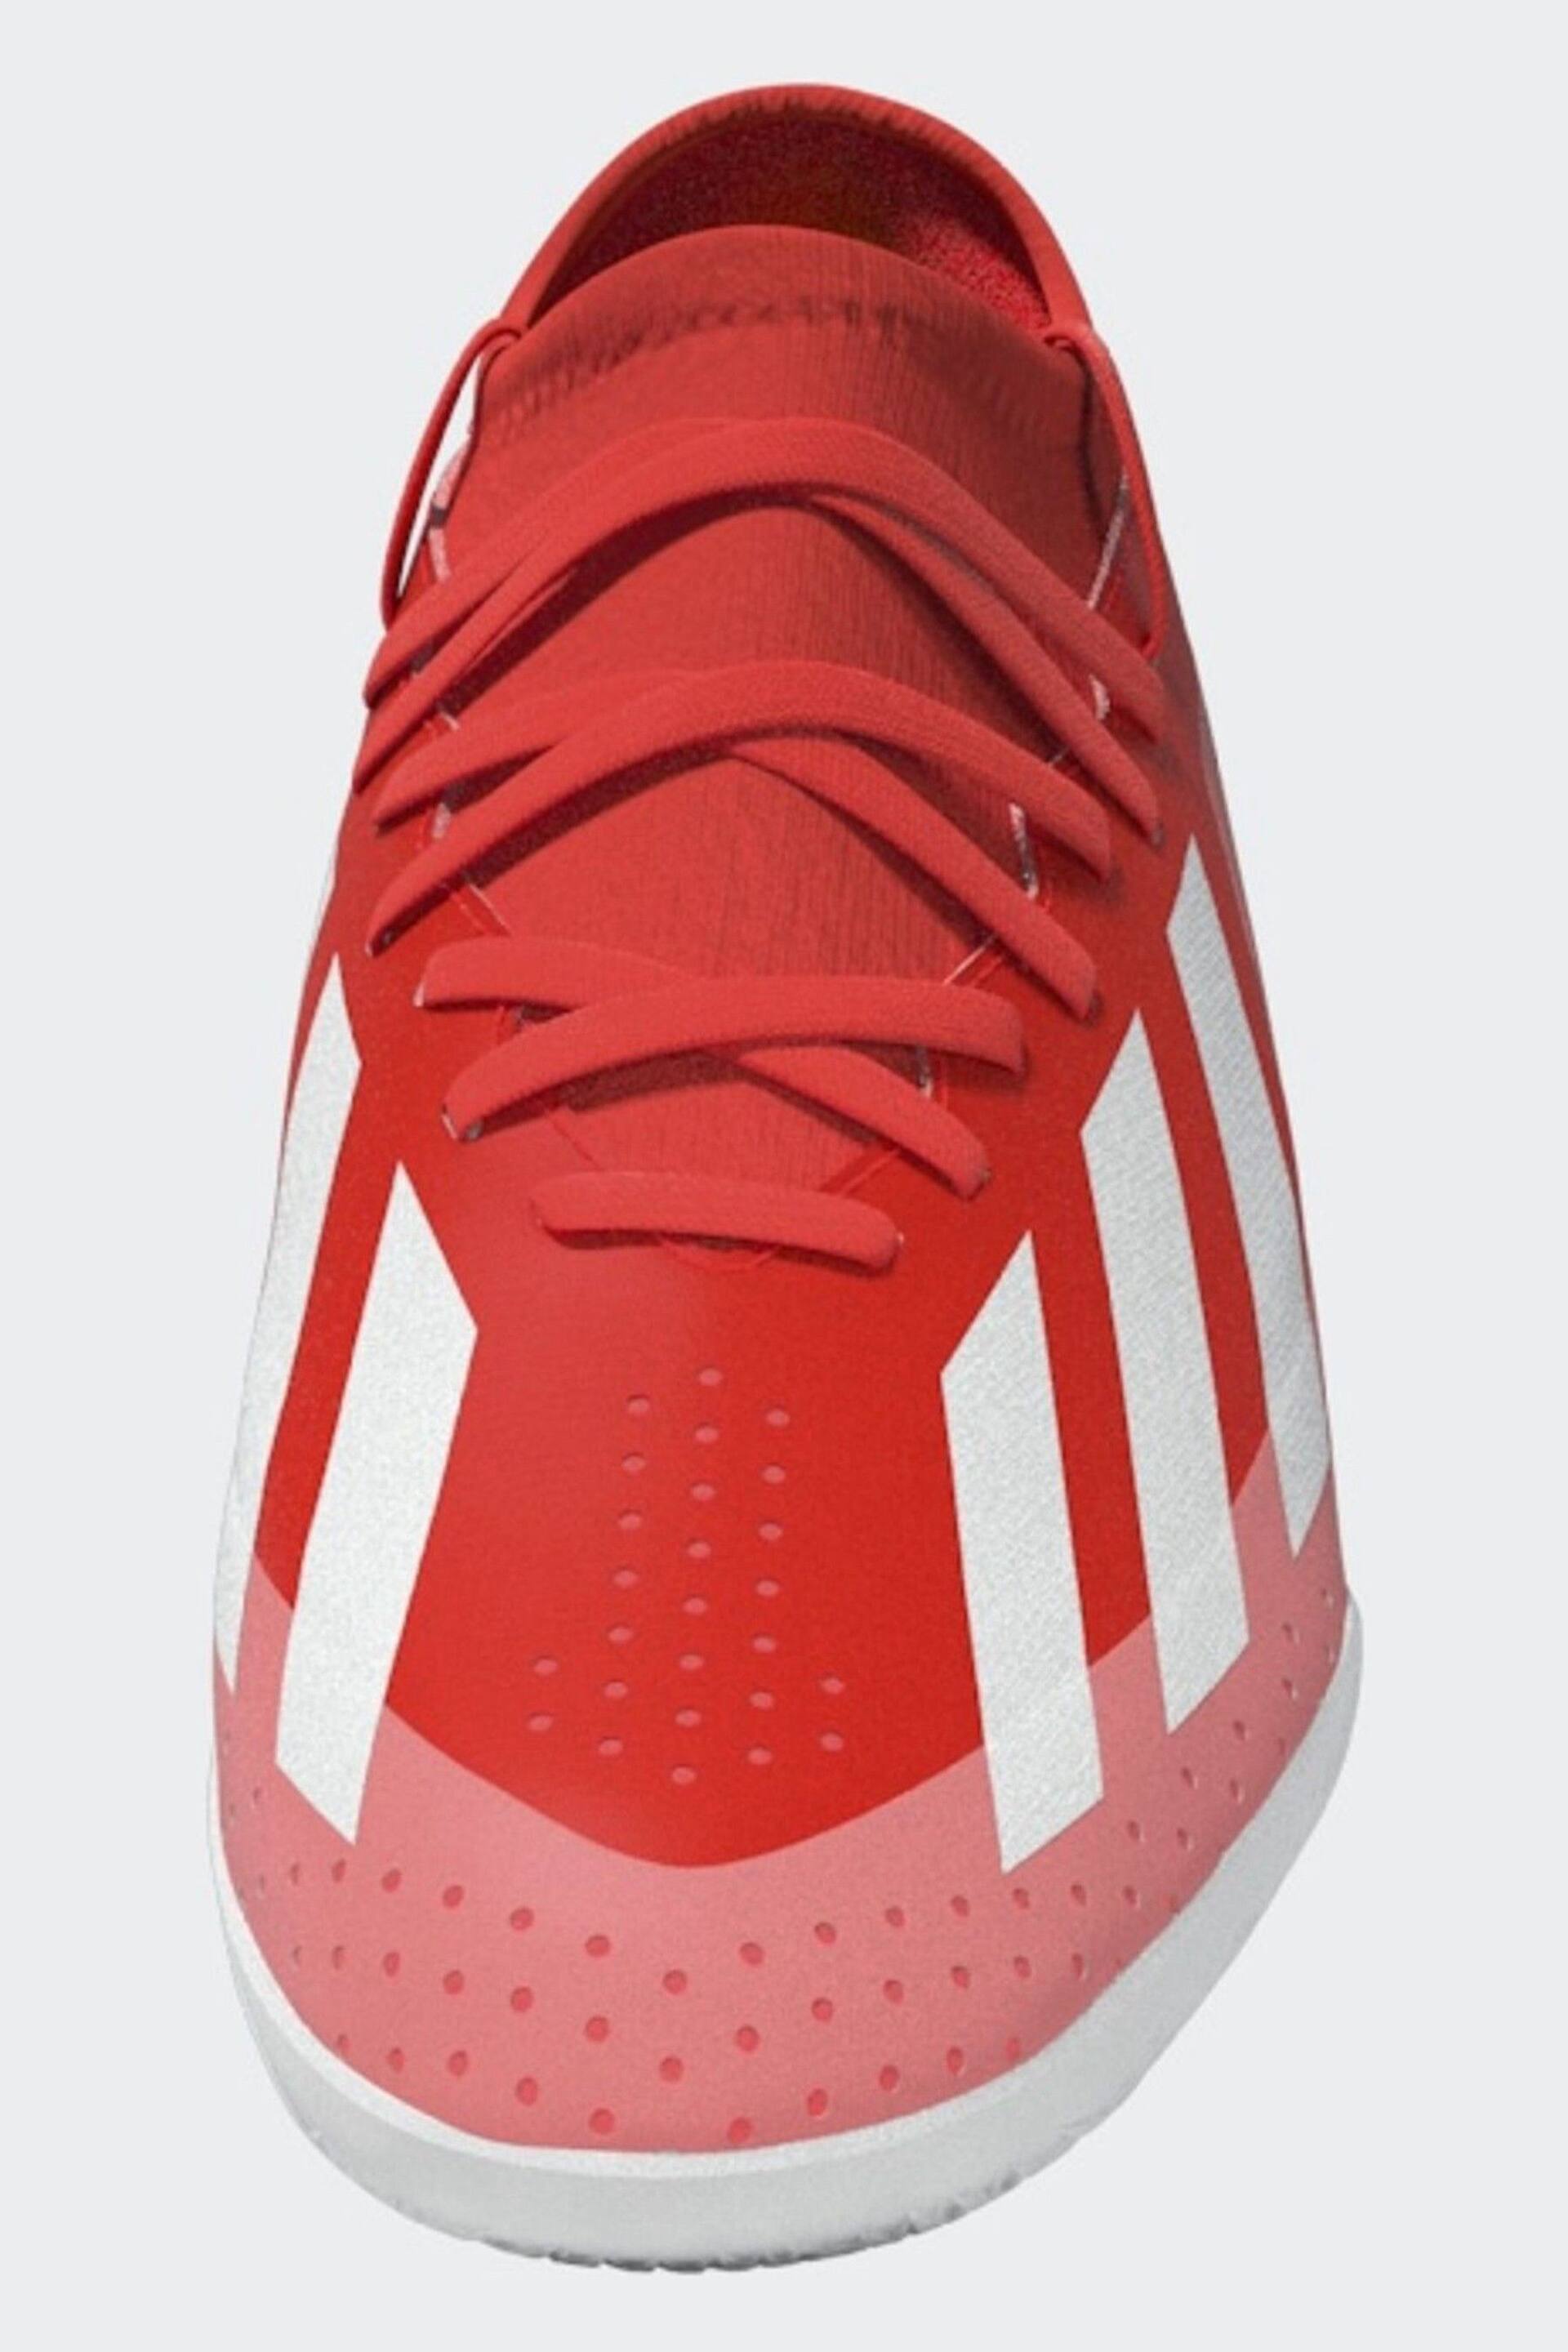 adidas Red/White Football X Crazyfast League Indoor Kids Boots - Image 14 of 20